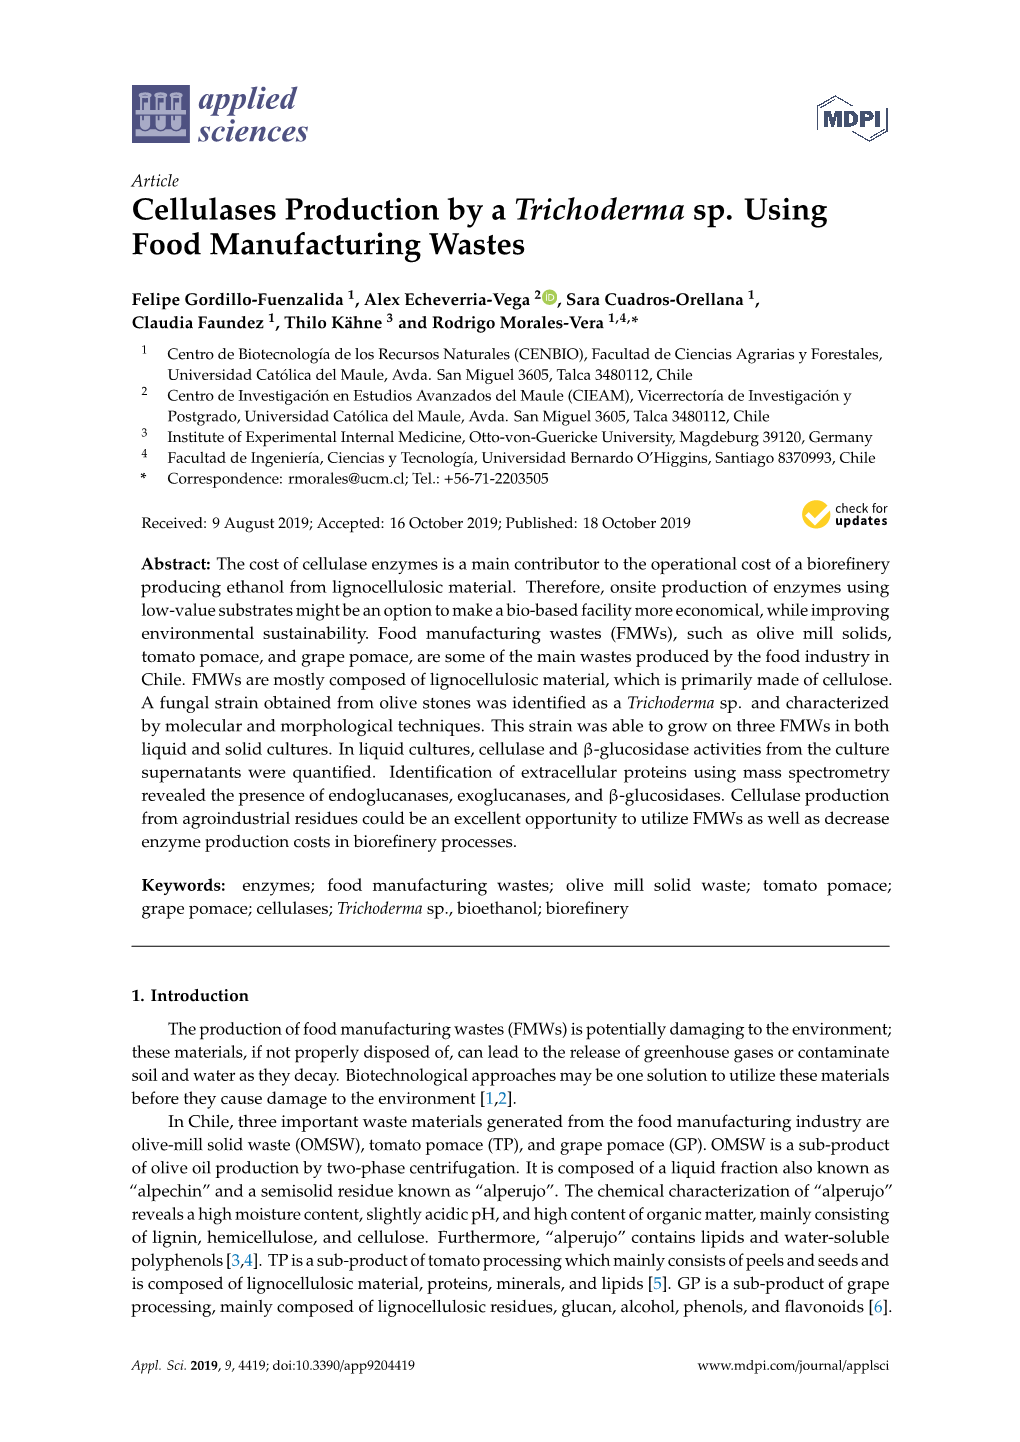 Cellulases Production by a Trichoderma Sp. Using Food Manufacturing Wastes